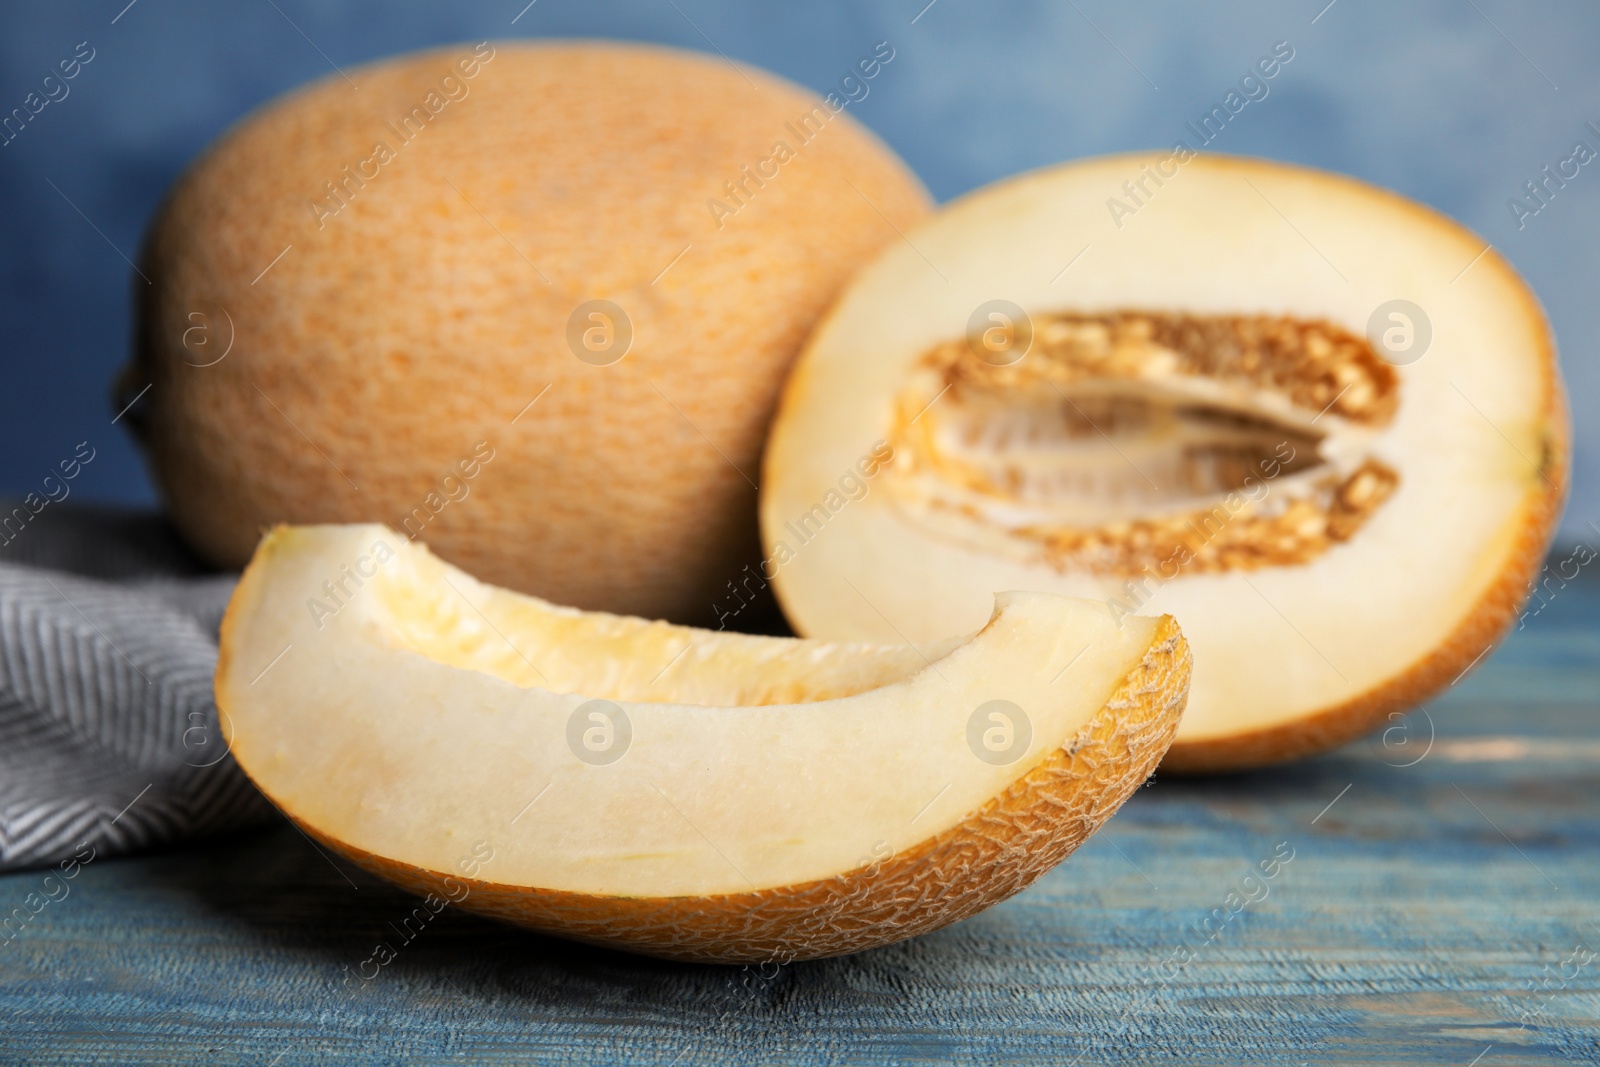 Photo of Tasty cut ripe melon on blue wooden table